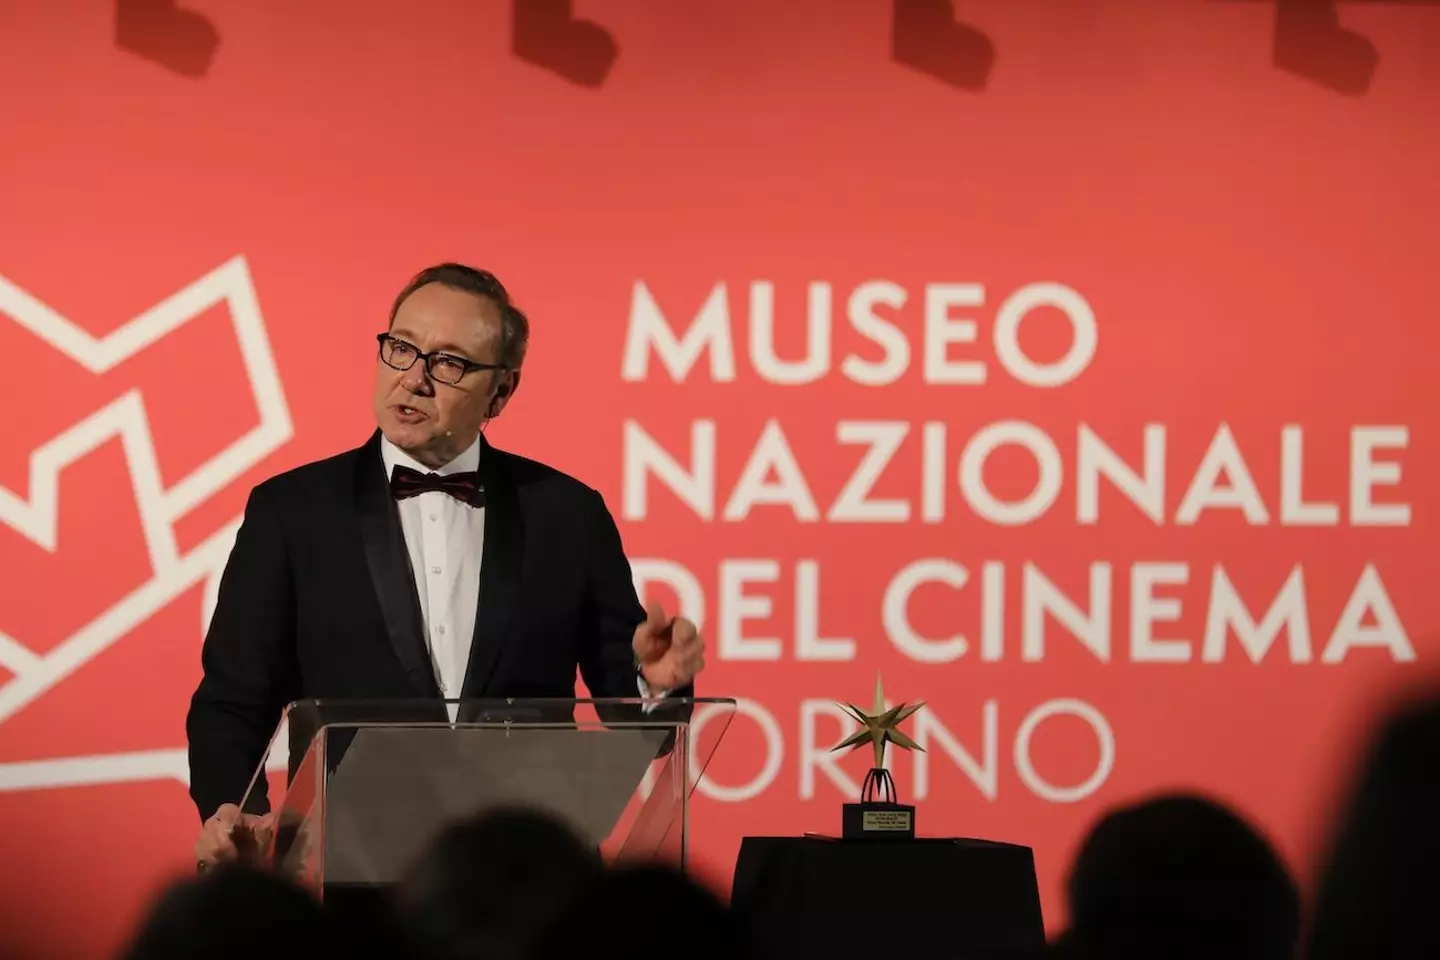 Amid a string of sexual misconduct accusations, Kevin Spacey has thanked an Italian museum for having 'the balls' to invite him to the awards ceremony.